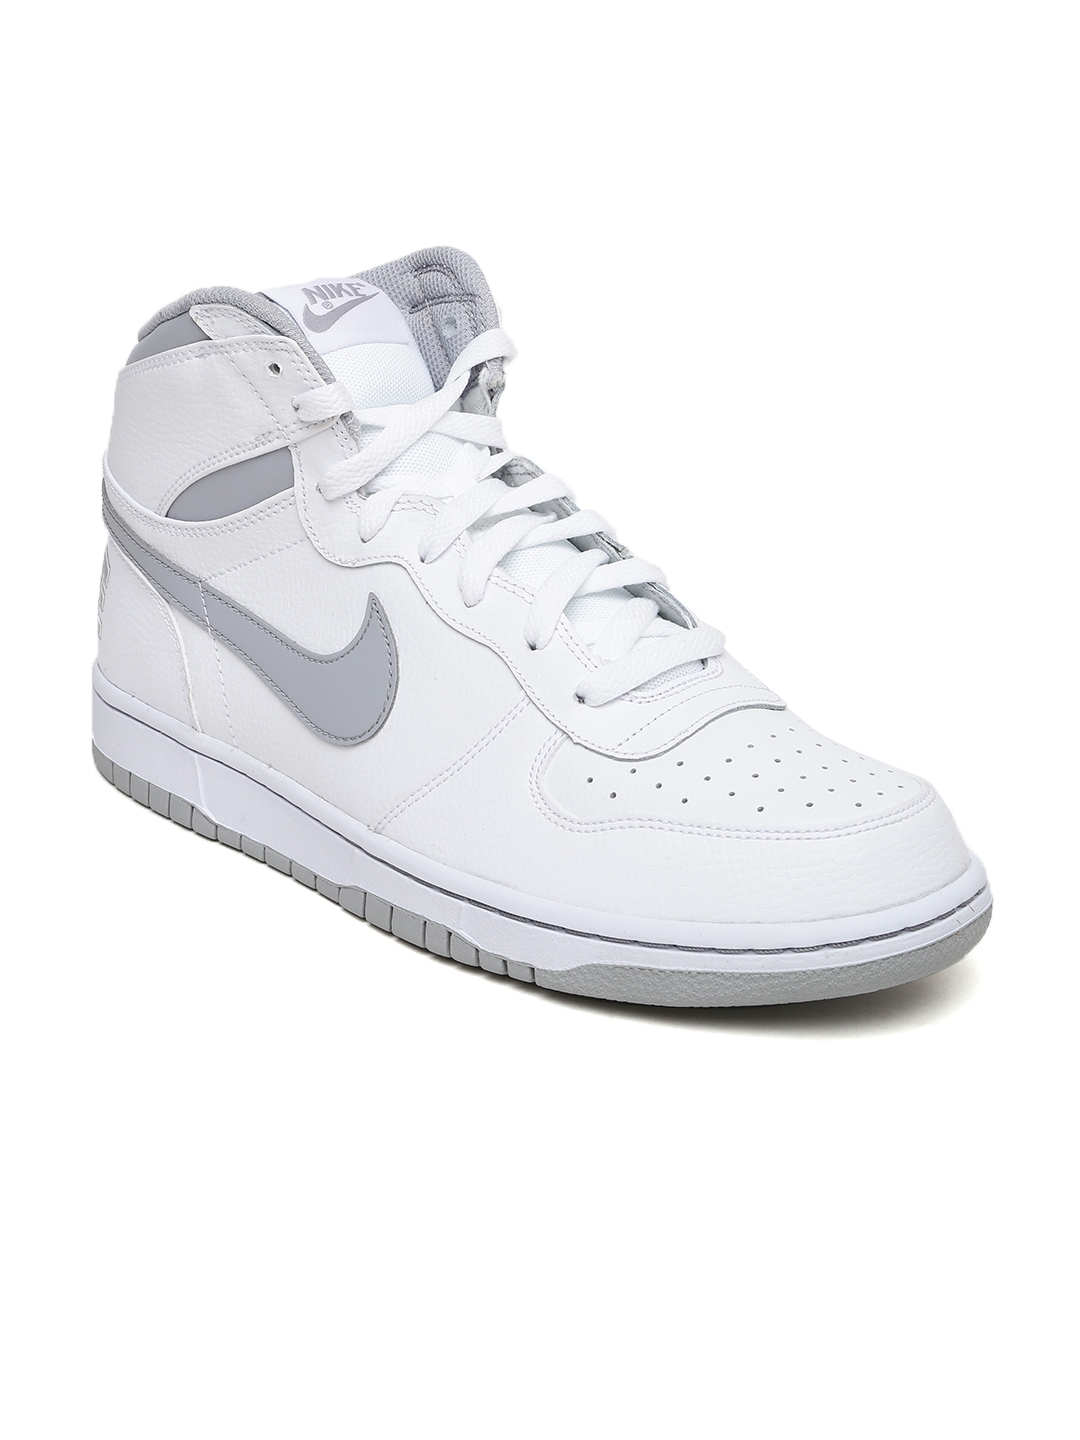 Nike Men White High tops Sneakers price Myntra. Casual Shoes Deals at ...